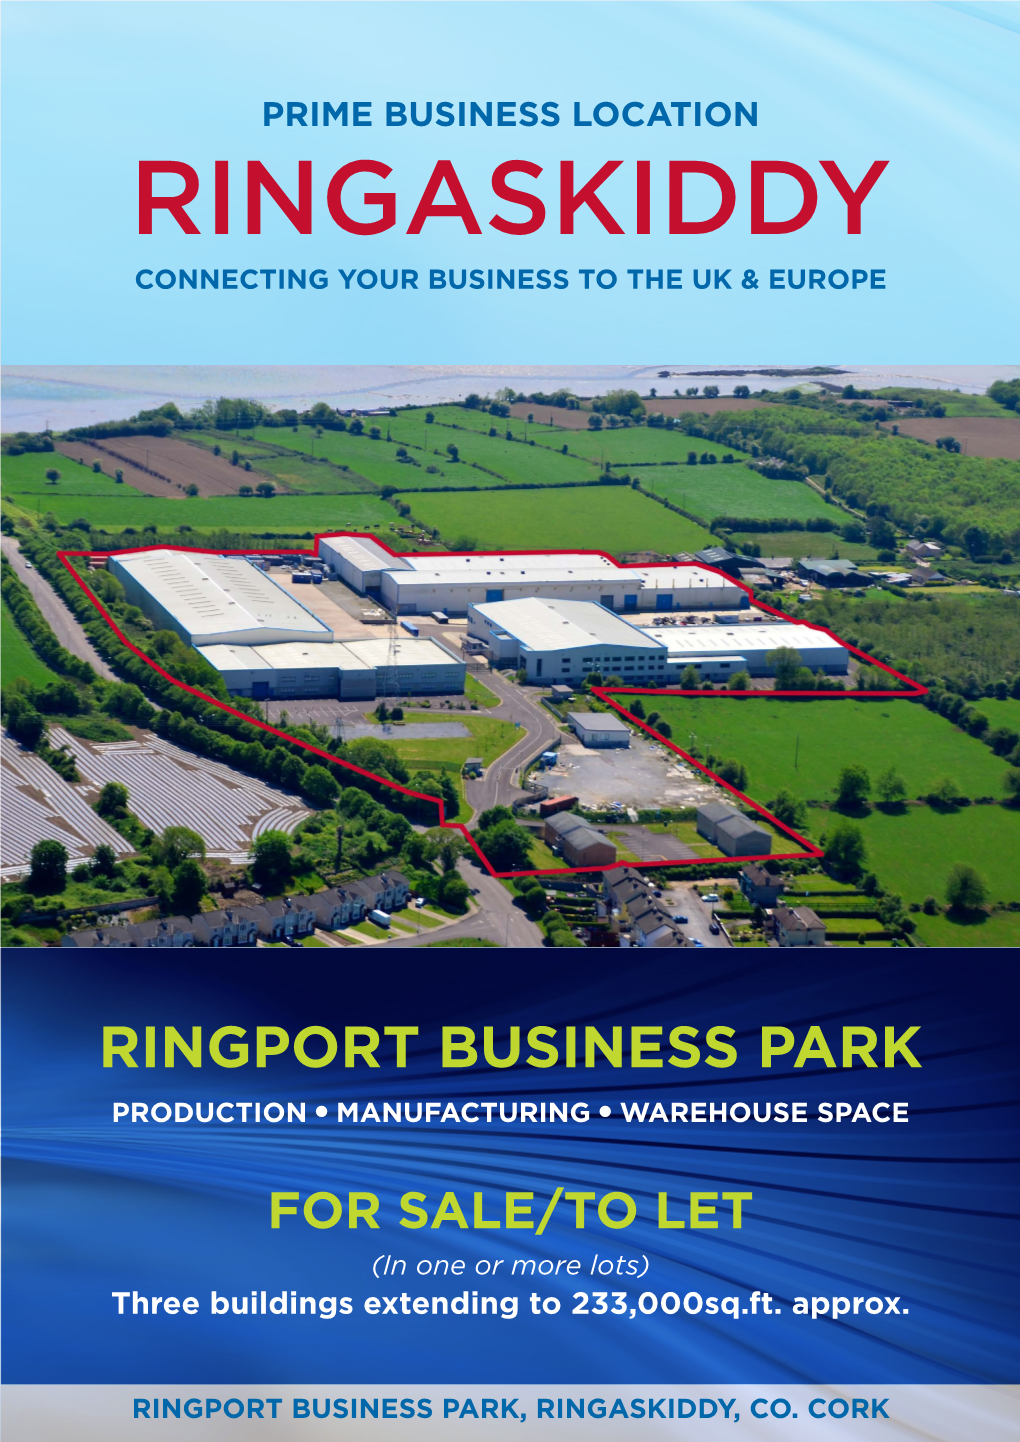 Ringaskiddy Connecting Your Business to the Uk & Europe